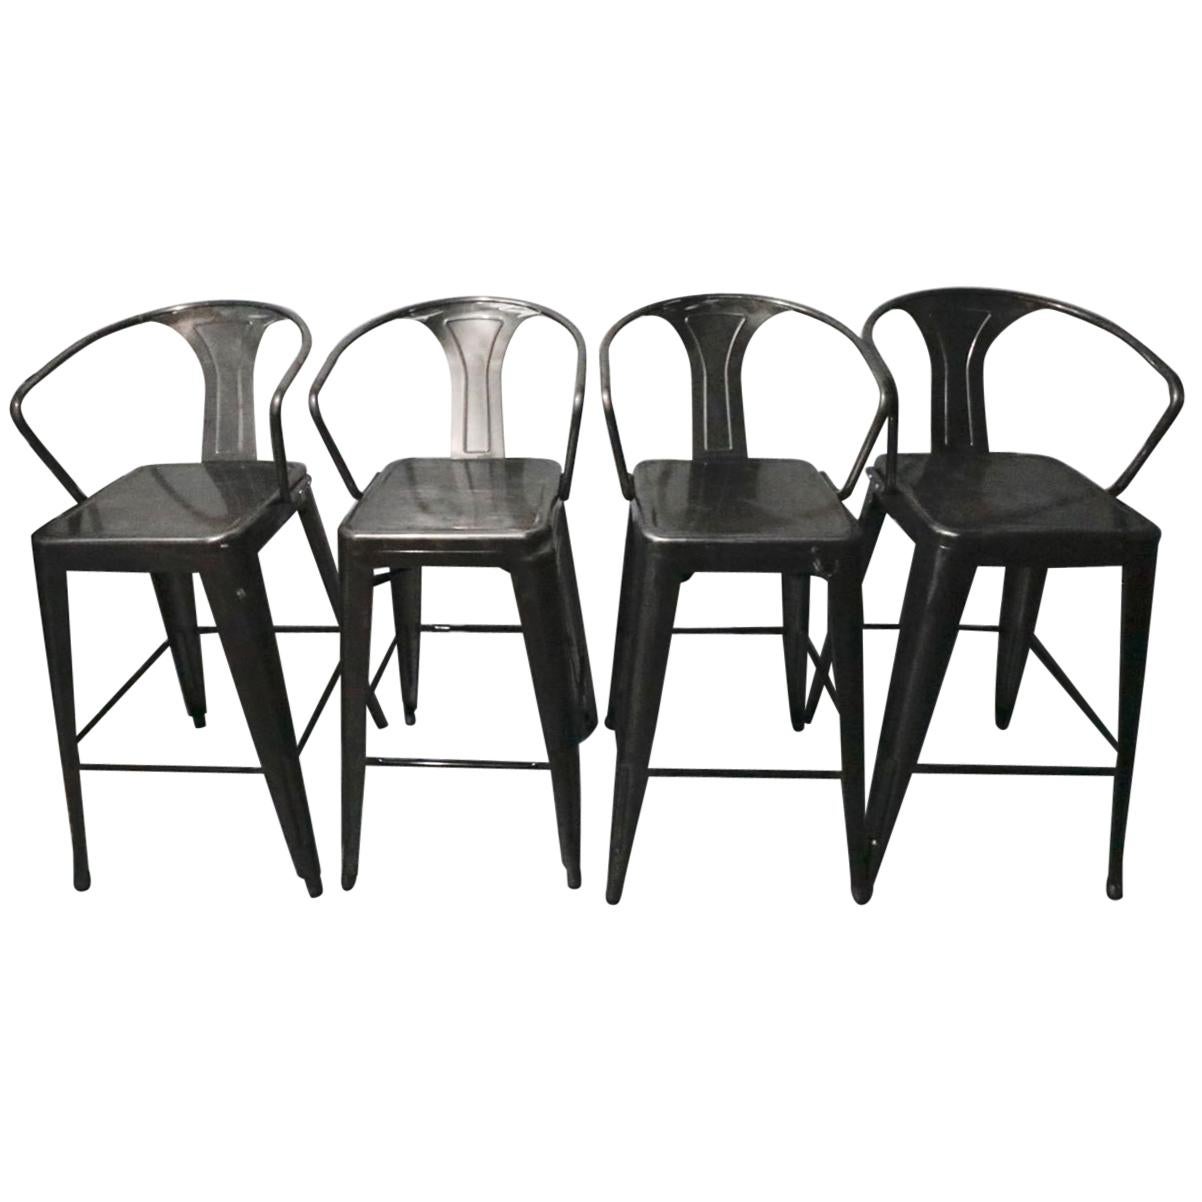 Fabulous Foursome of Vintage Industrial Metal Bar Stools and Chairs For Sale